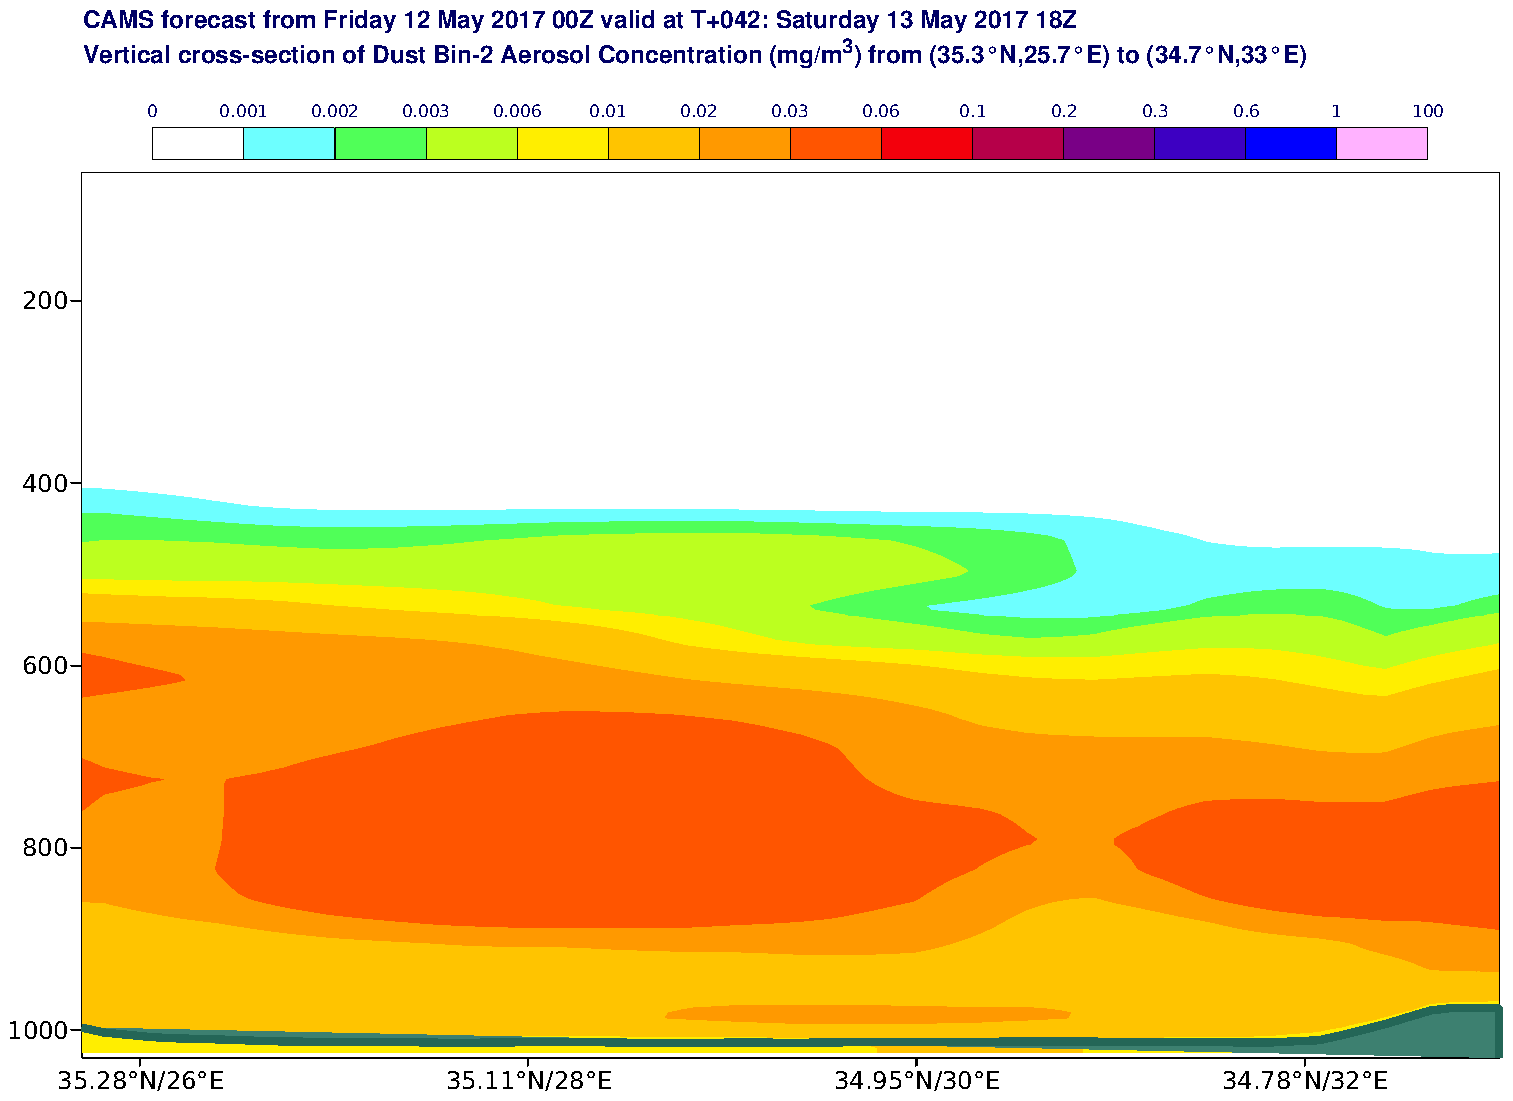 Vertical cross-section of Dust Bin-2 Aerosol Concentration (mg/m3) valid at T42 - 2017-05-13 18:00